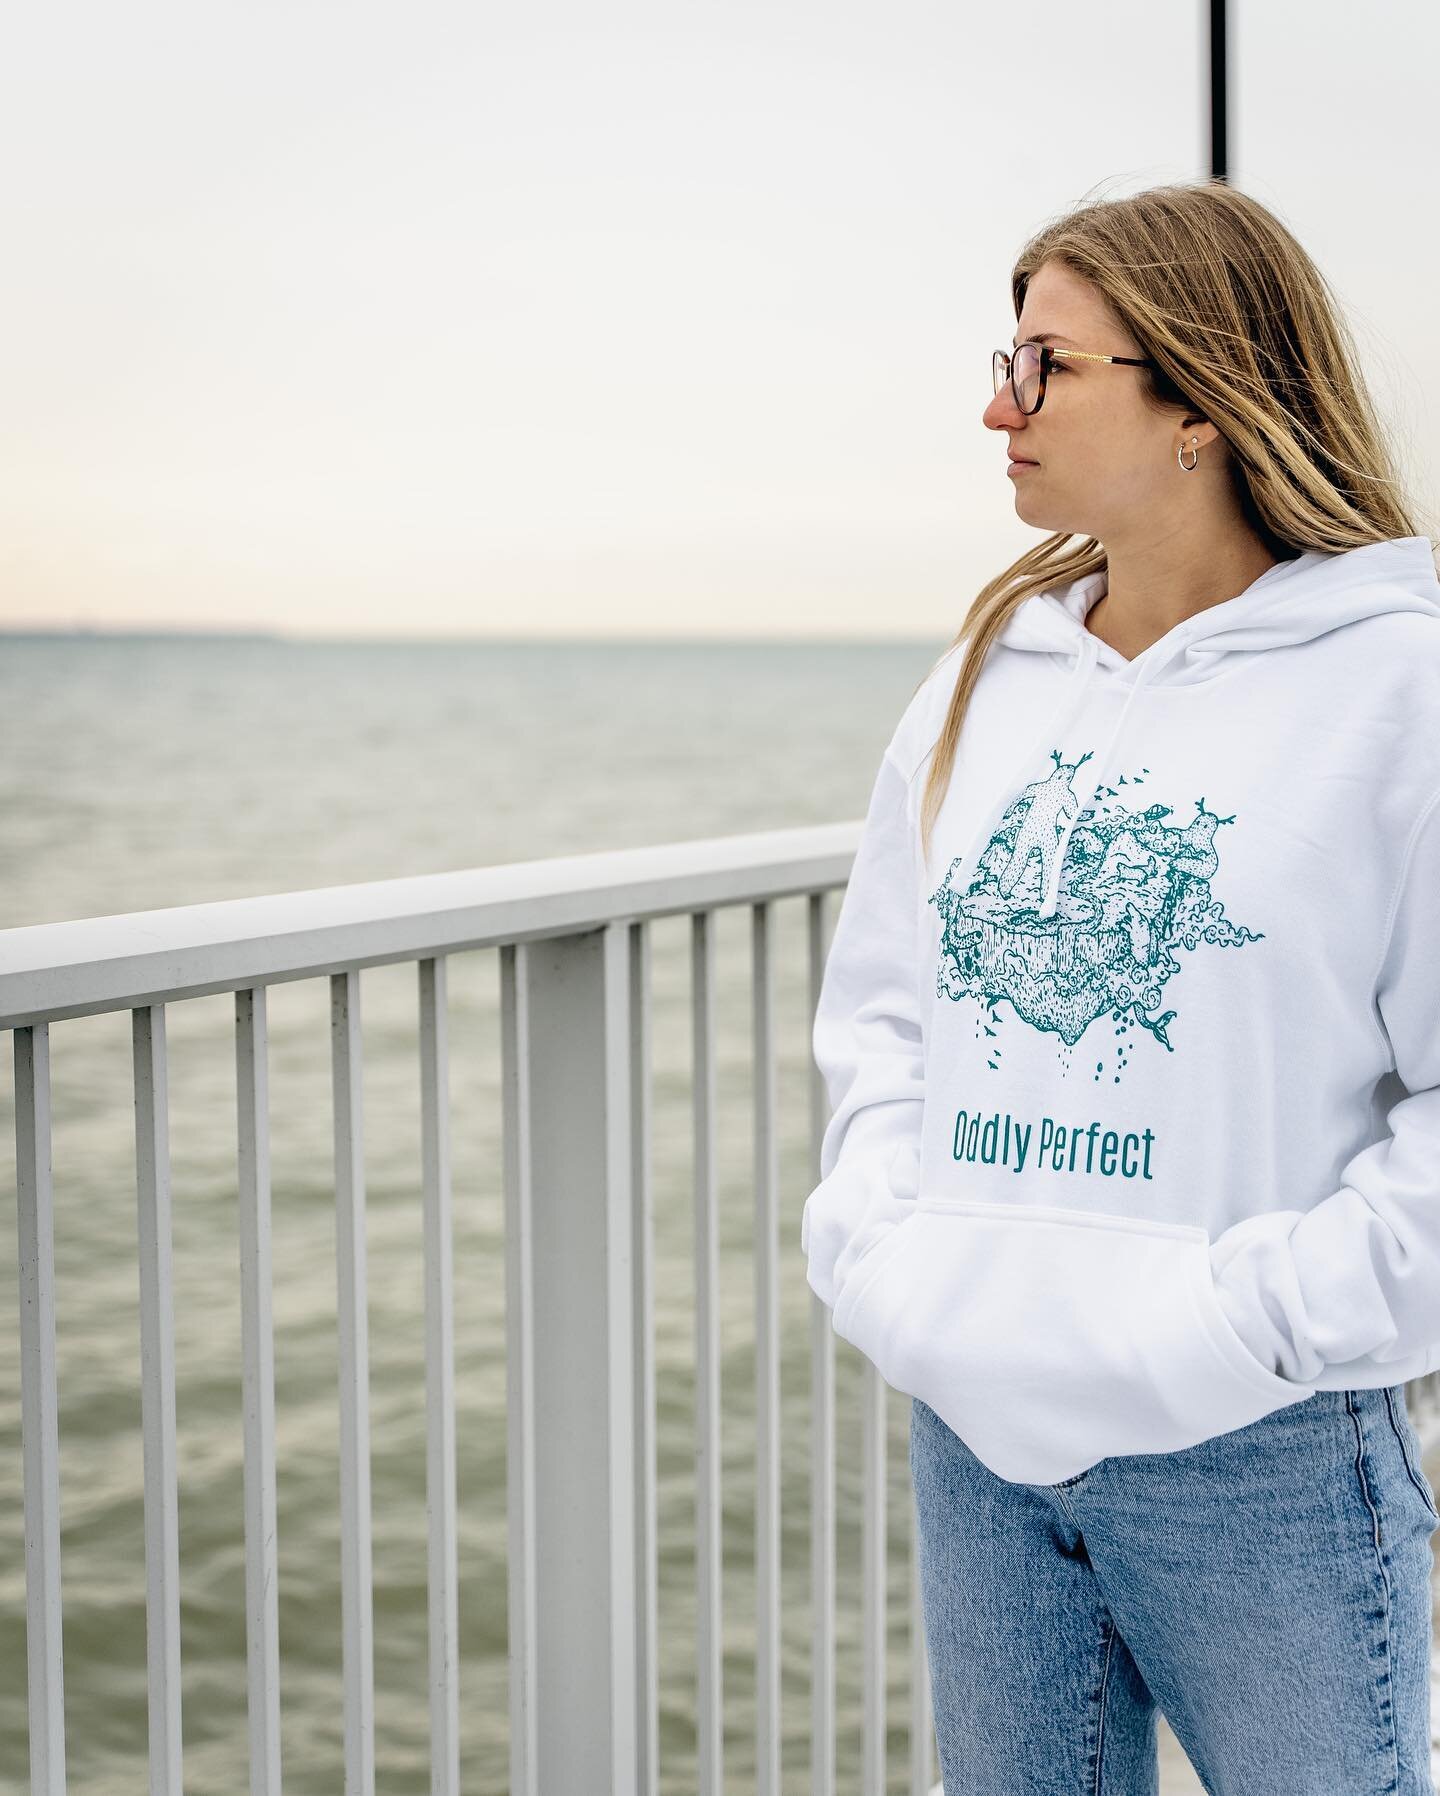 Oddly Perfect Time for an Oddly Perfect Hoodie!

Check out our new merch at the Link in Bio or www.dogoodspirits.ca 

.
.
.
#HvOSpringWaterVodka #OntarioPremiumVodka #Vodka #LCBO #Cocktails #CraftCocktails #Toronto #Ottawa #SaultSainteMarie #TheSoo #